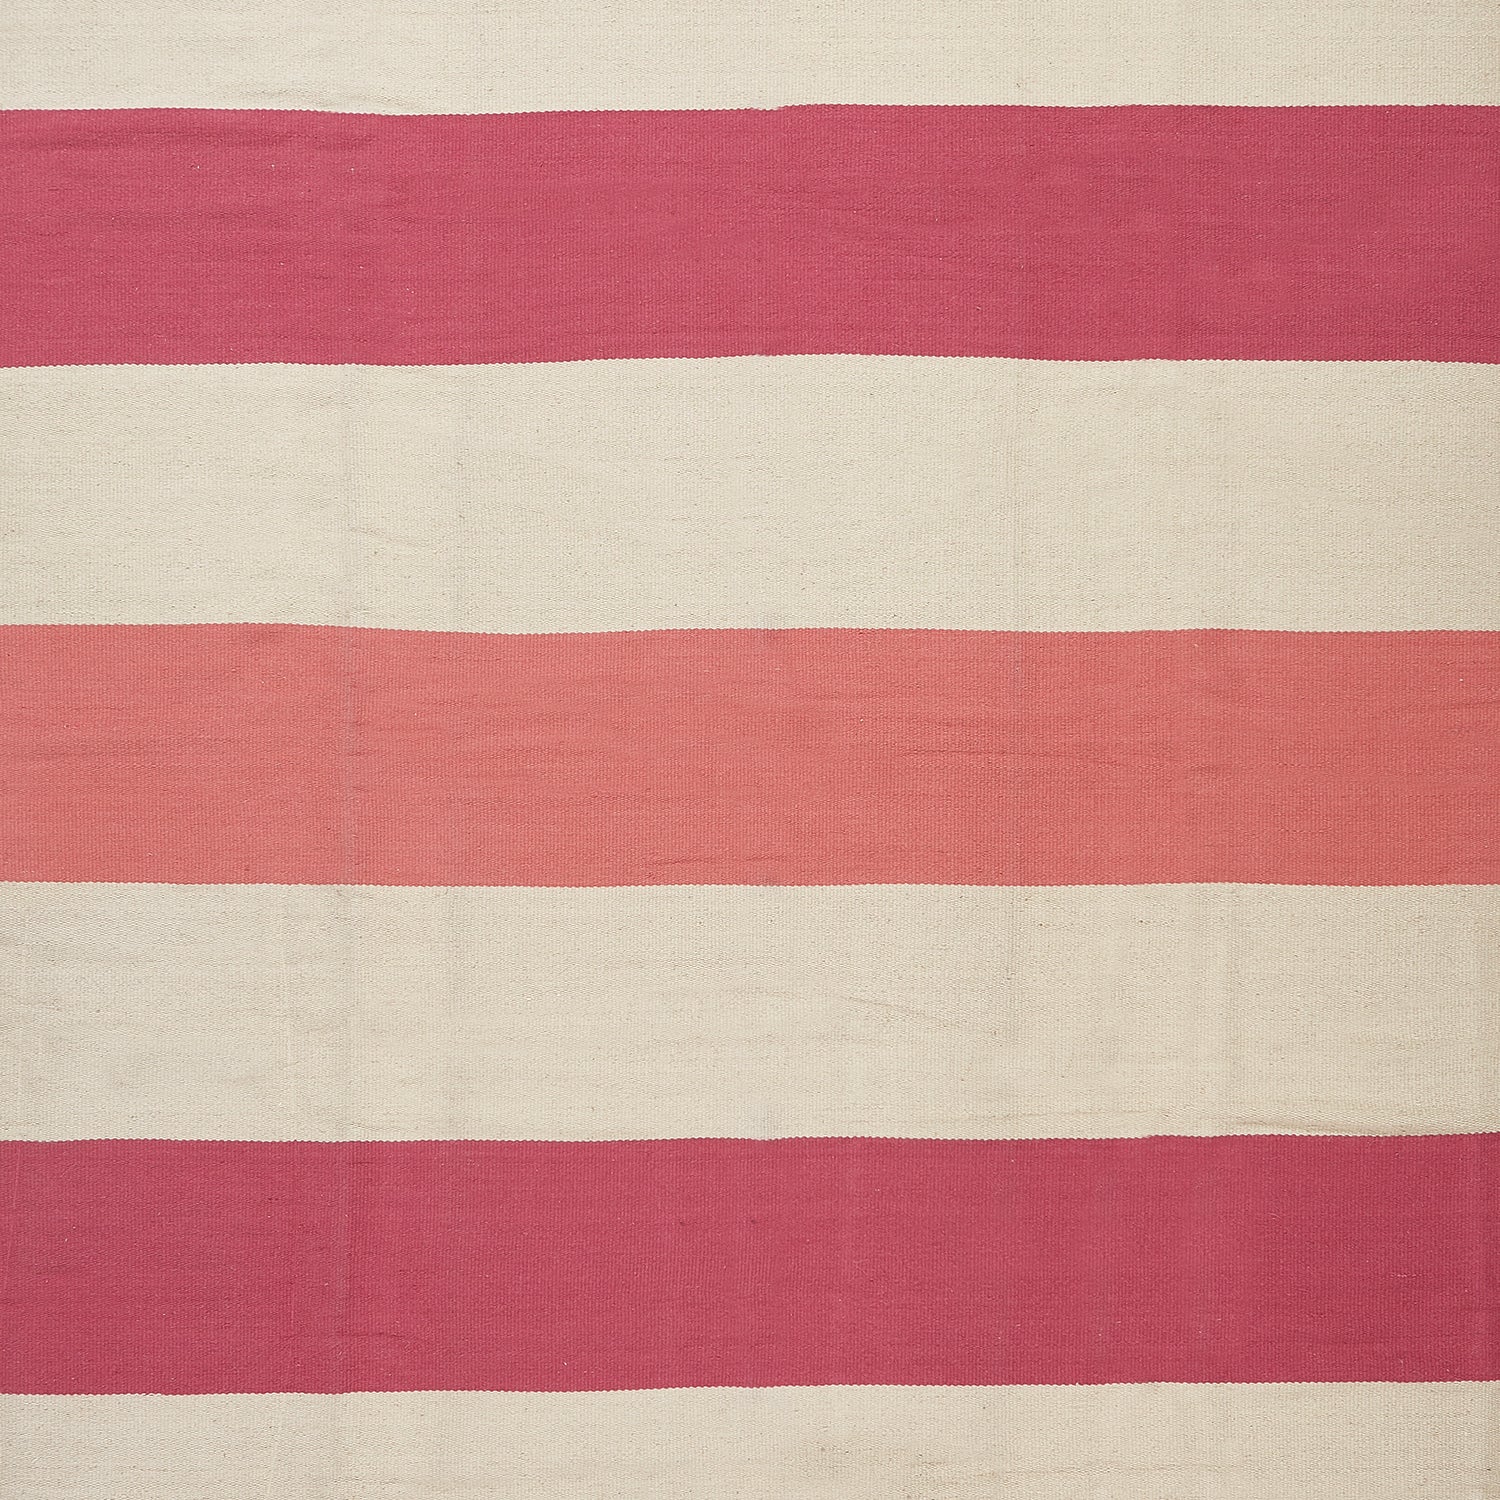 Handcrafted, minimalist textile with alternating cream and pink stripes.